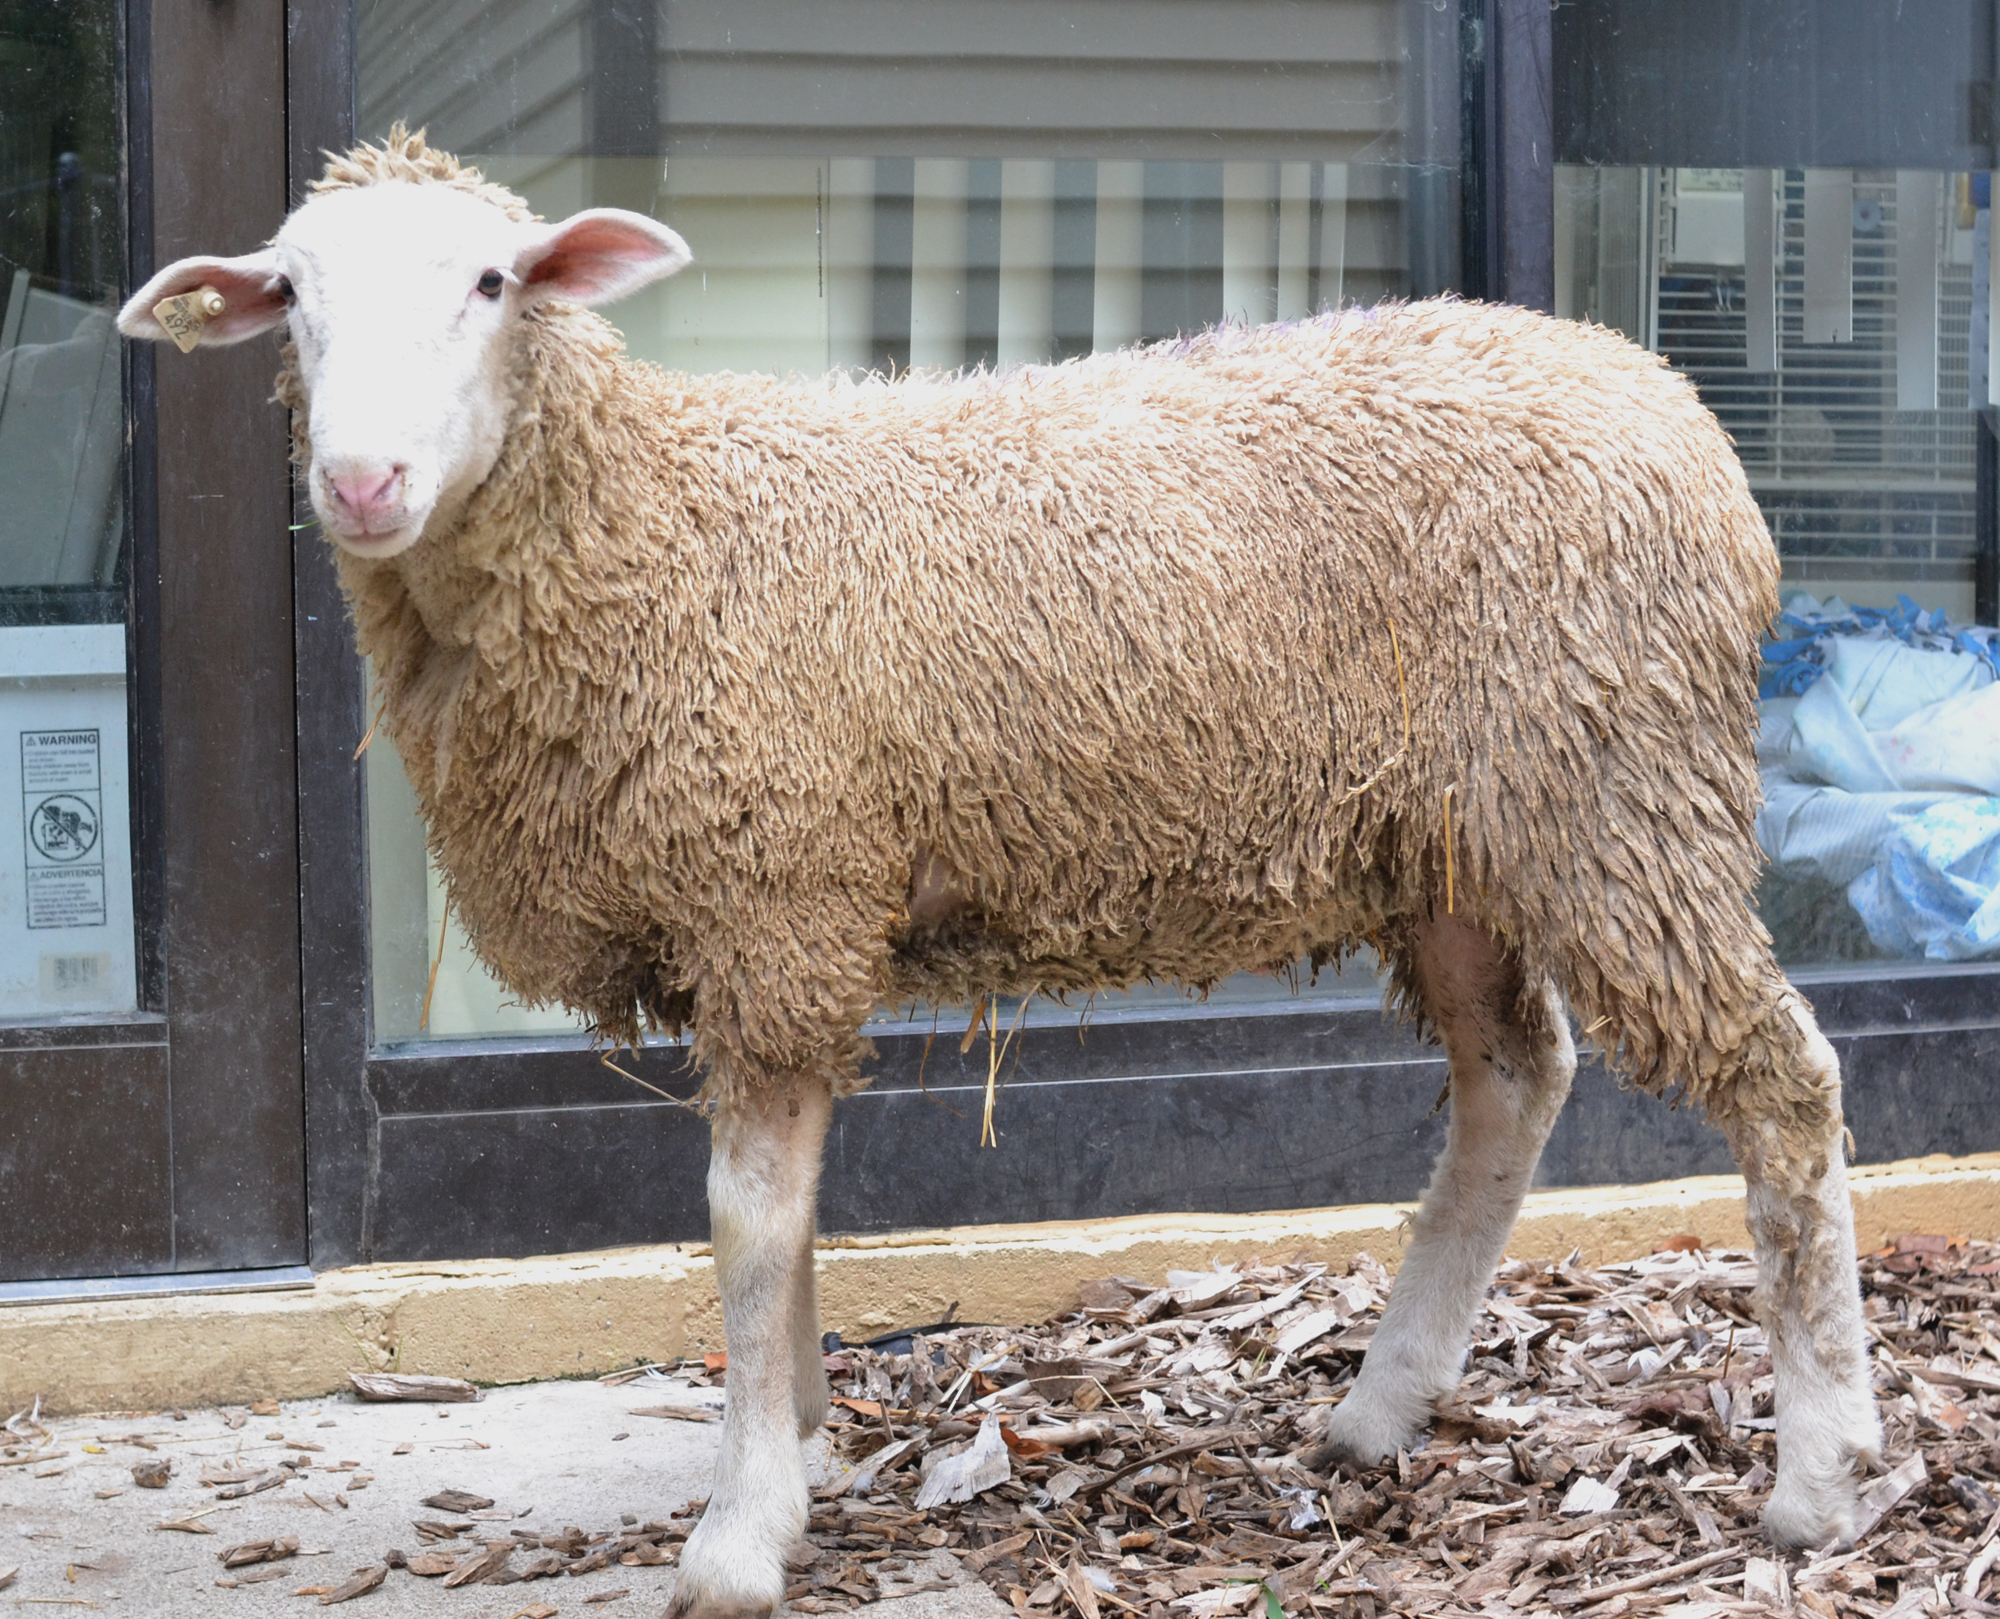 This sheep was rescued after an adventure in Detroit. (credit: Michigan Humane Society)